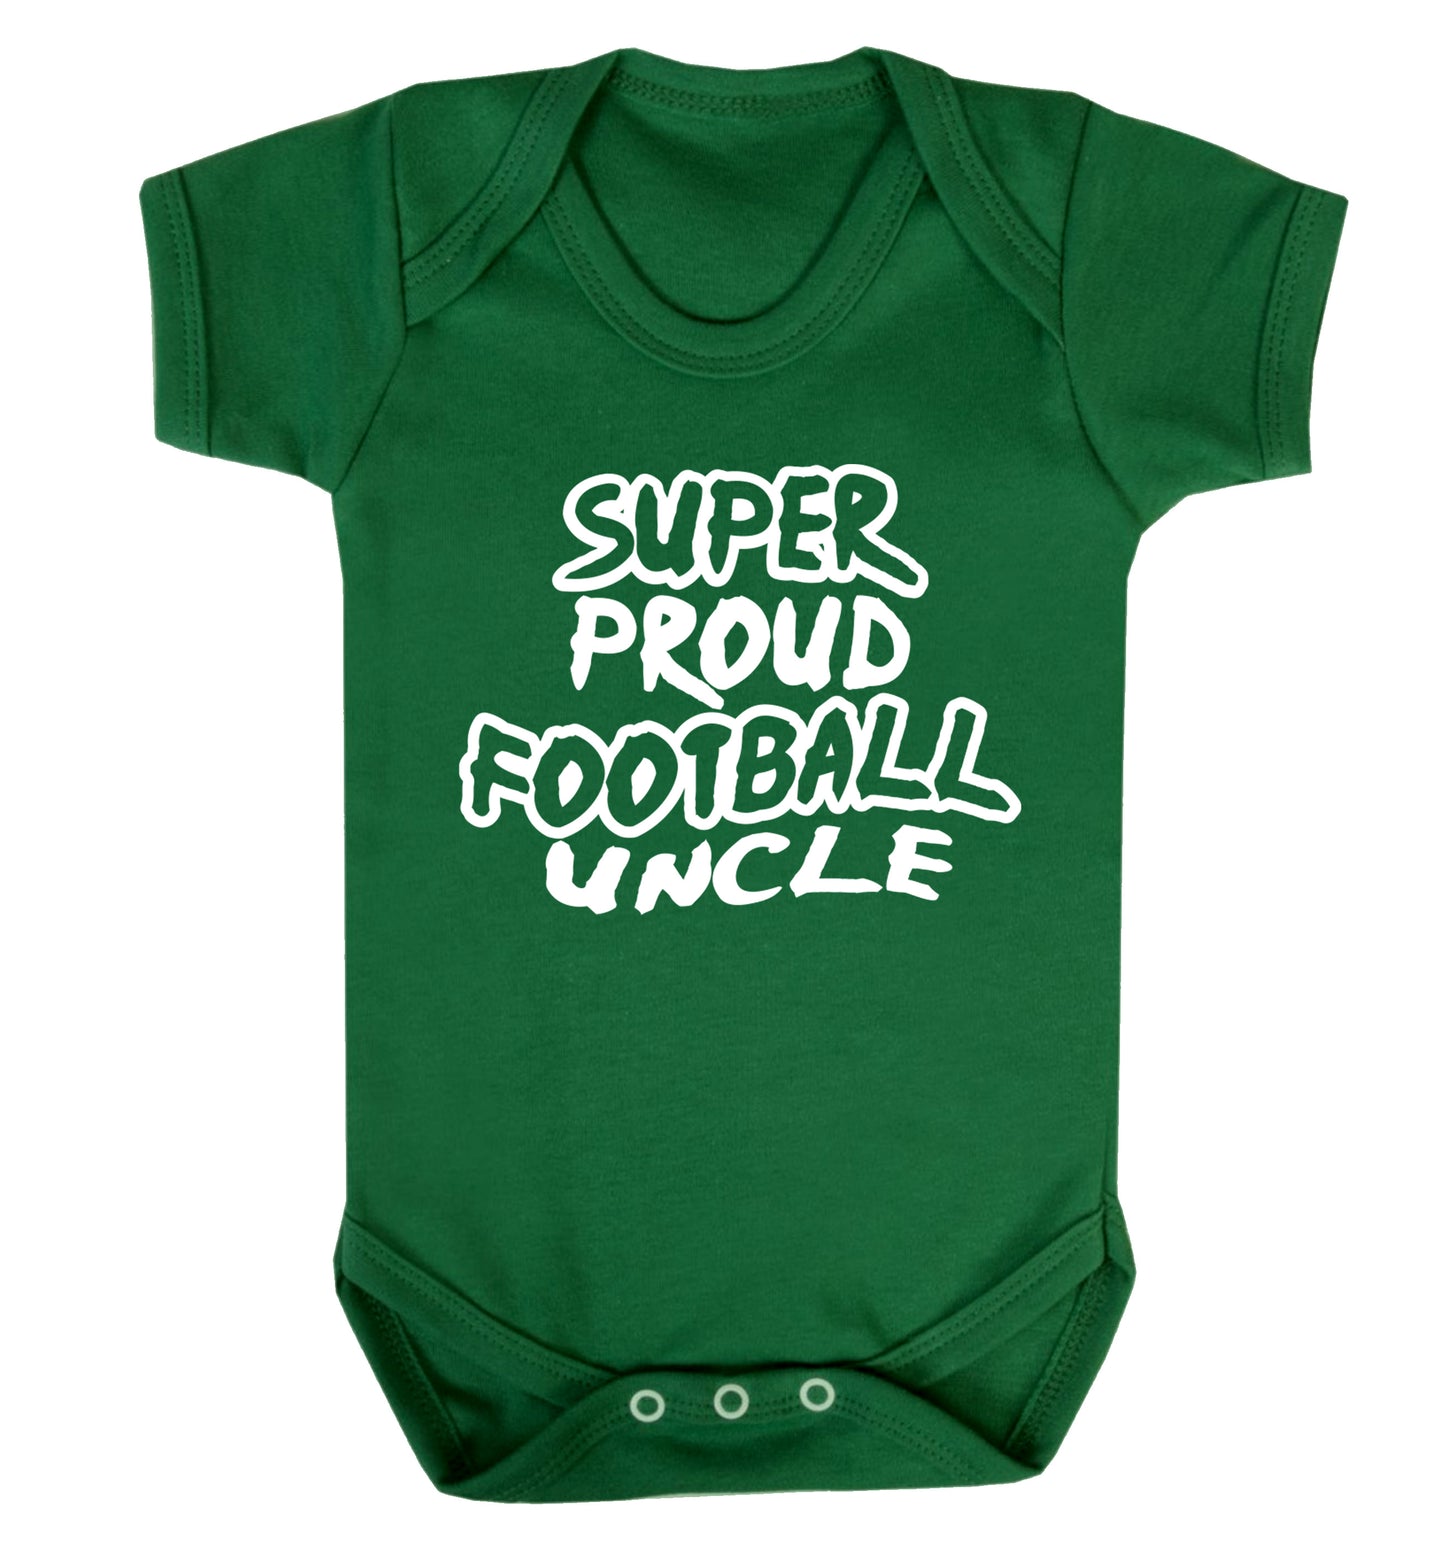 Super proud football uncle Baby Vest green 18-24 months